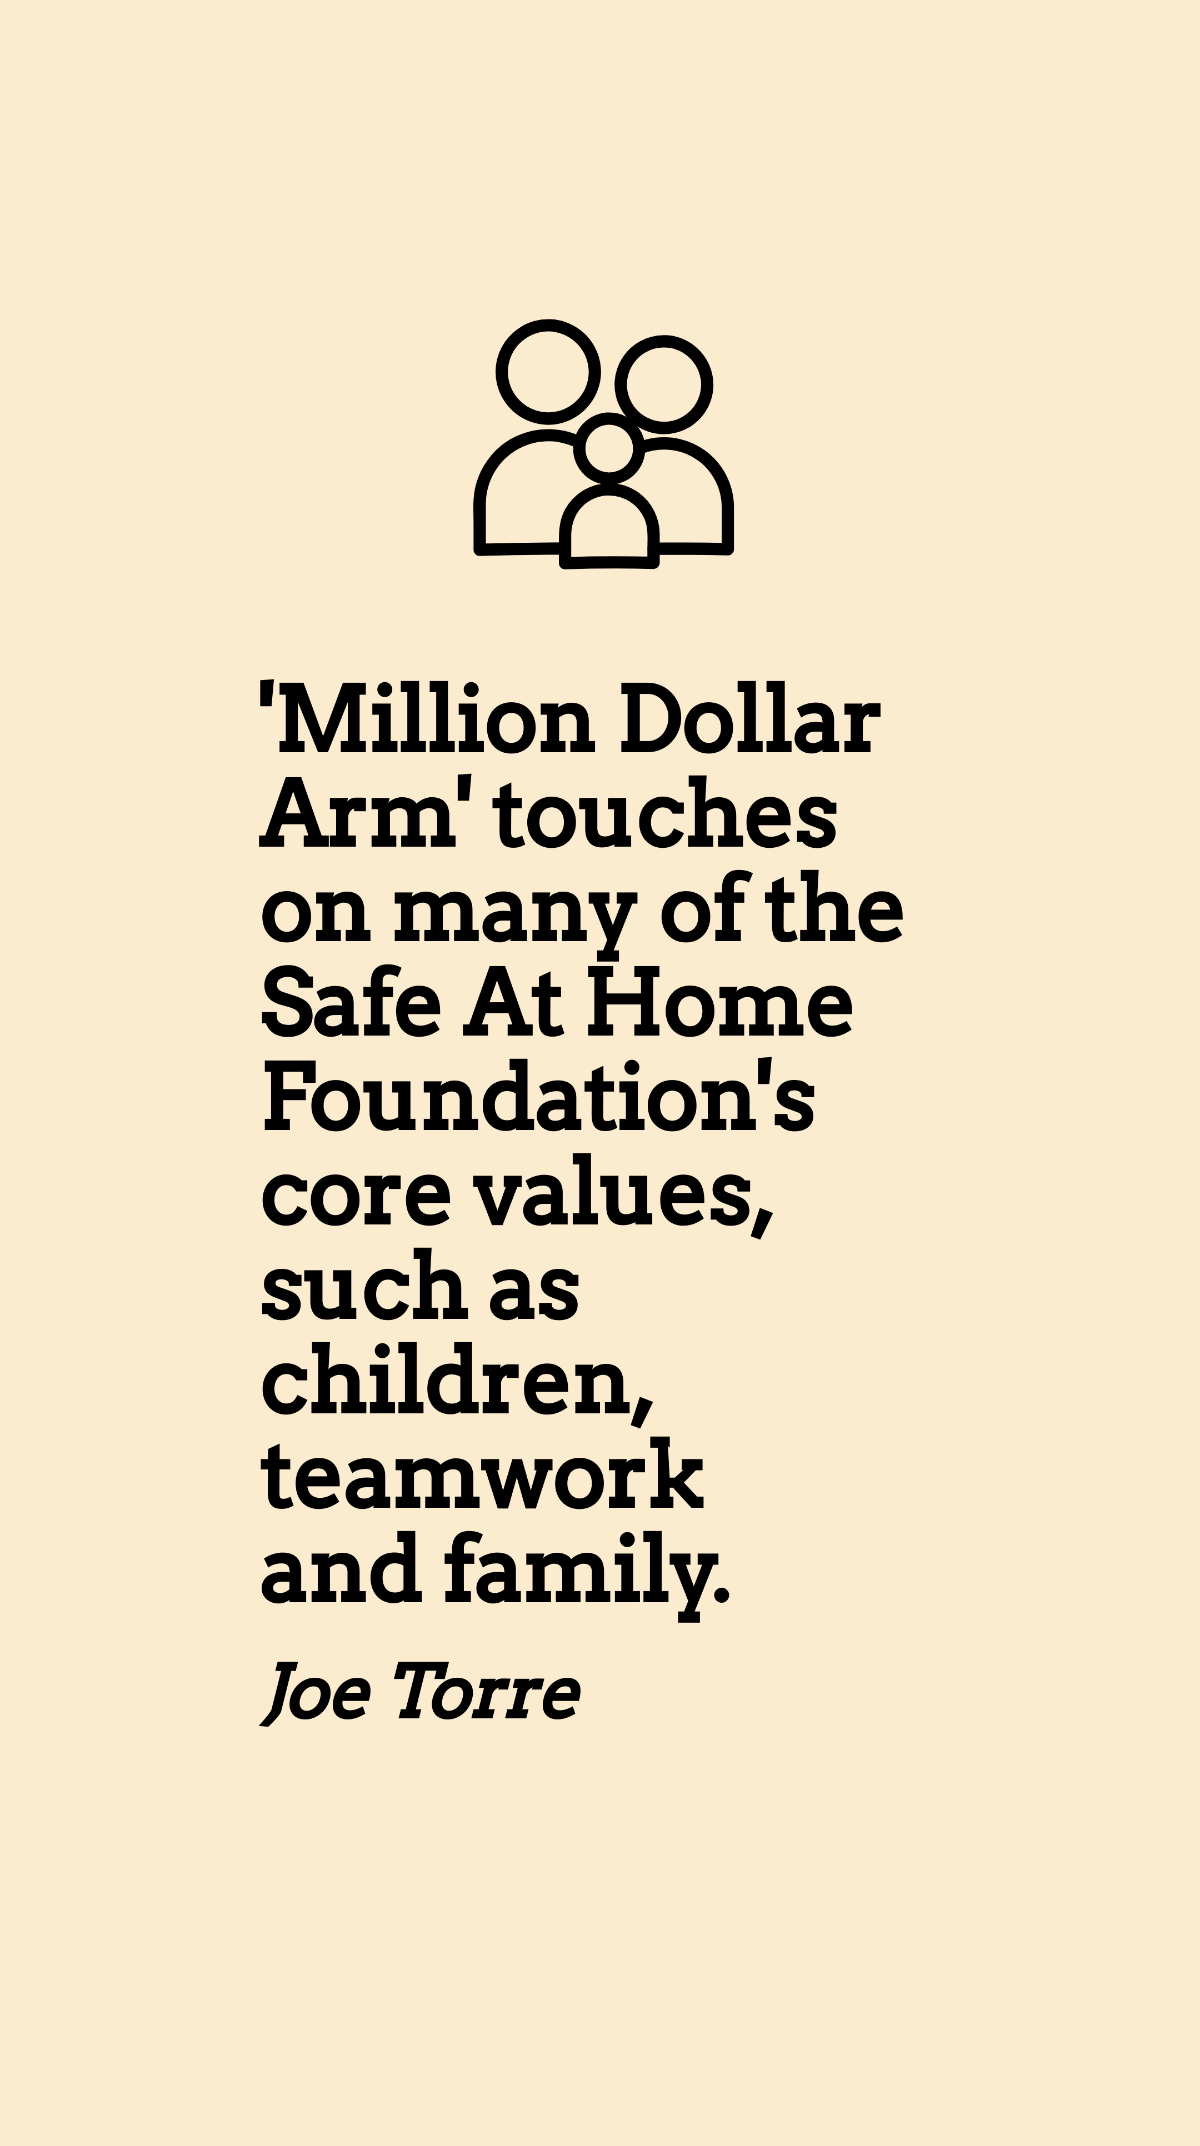 Free Joe Torre - 'Million Dollar Arm' touches on many of the Safe At Home Foundation's core values, such as children, teamwork and family. Template